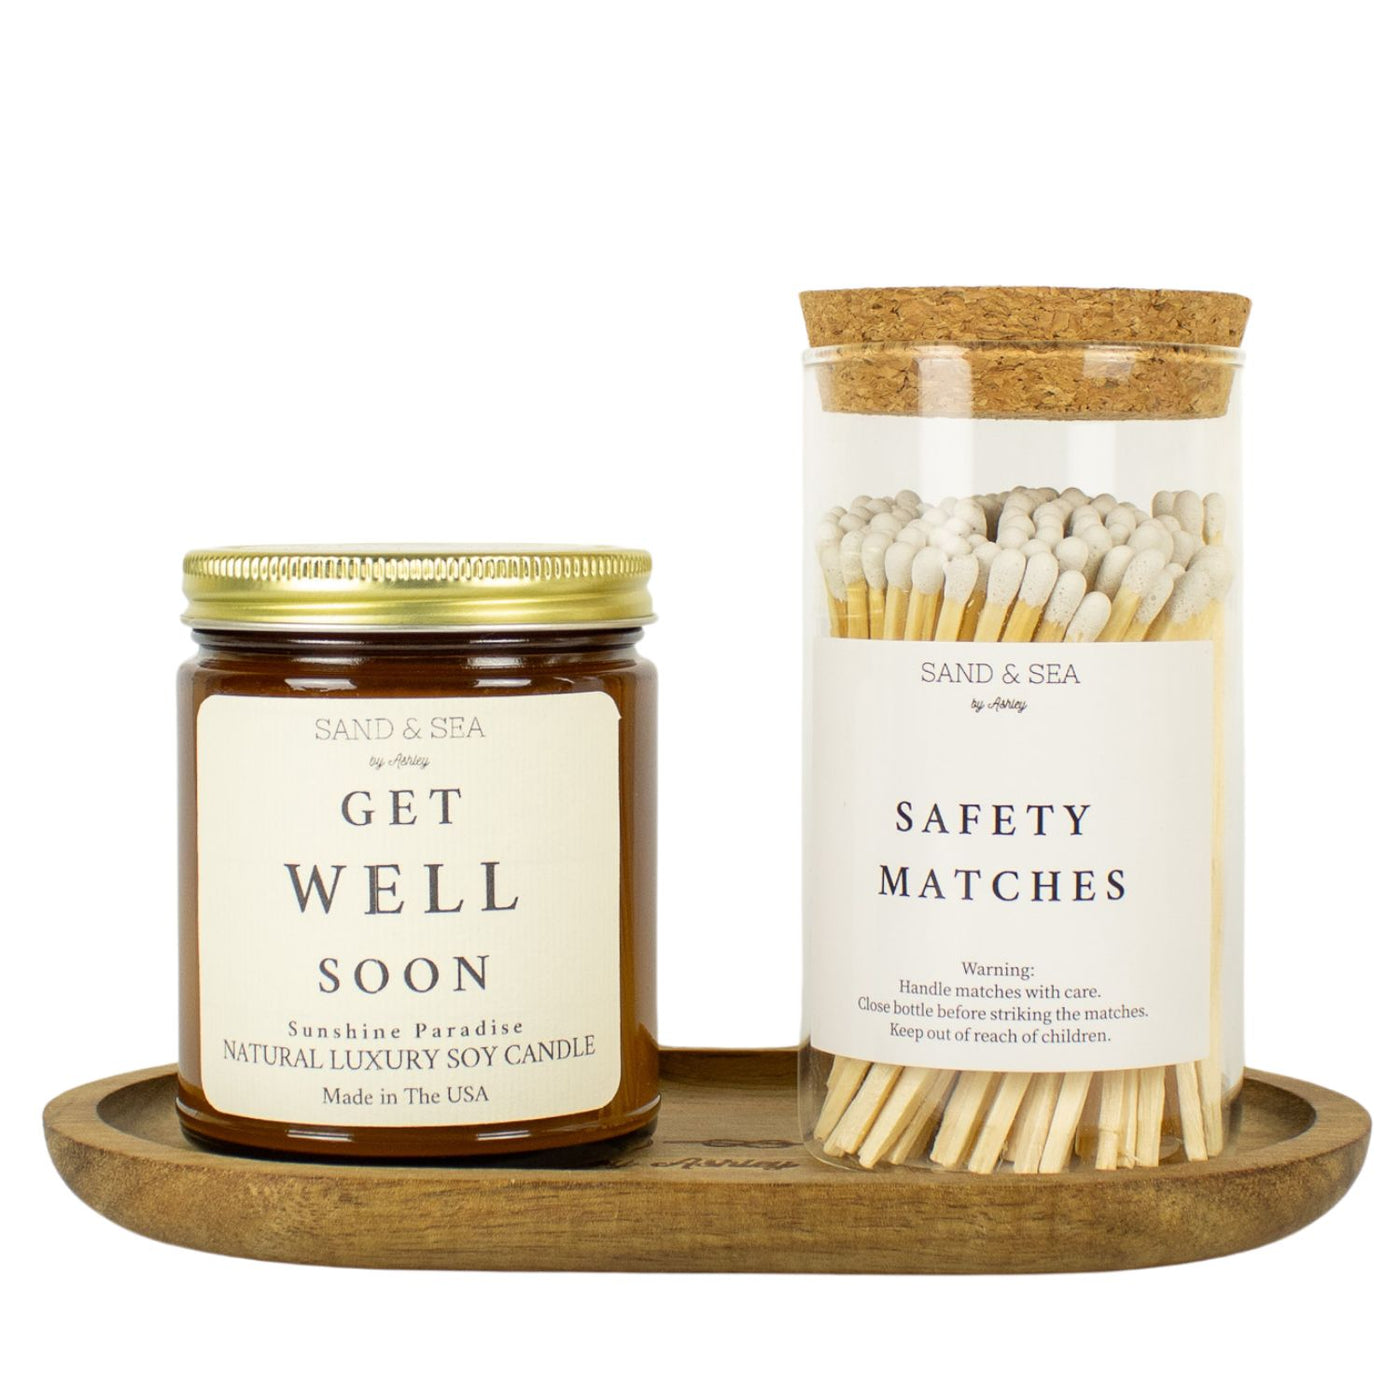 Get Well Soon Candle Gift Sets